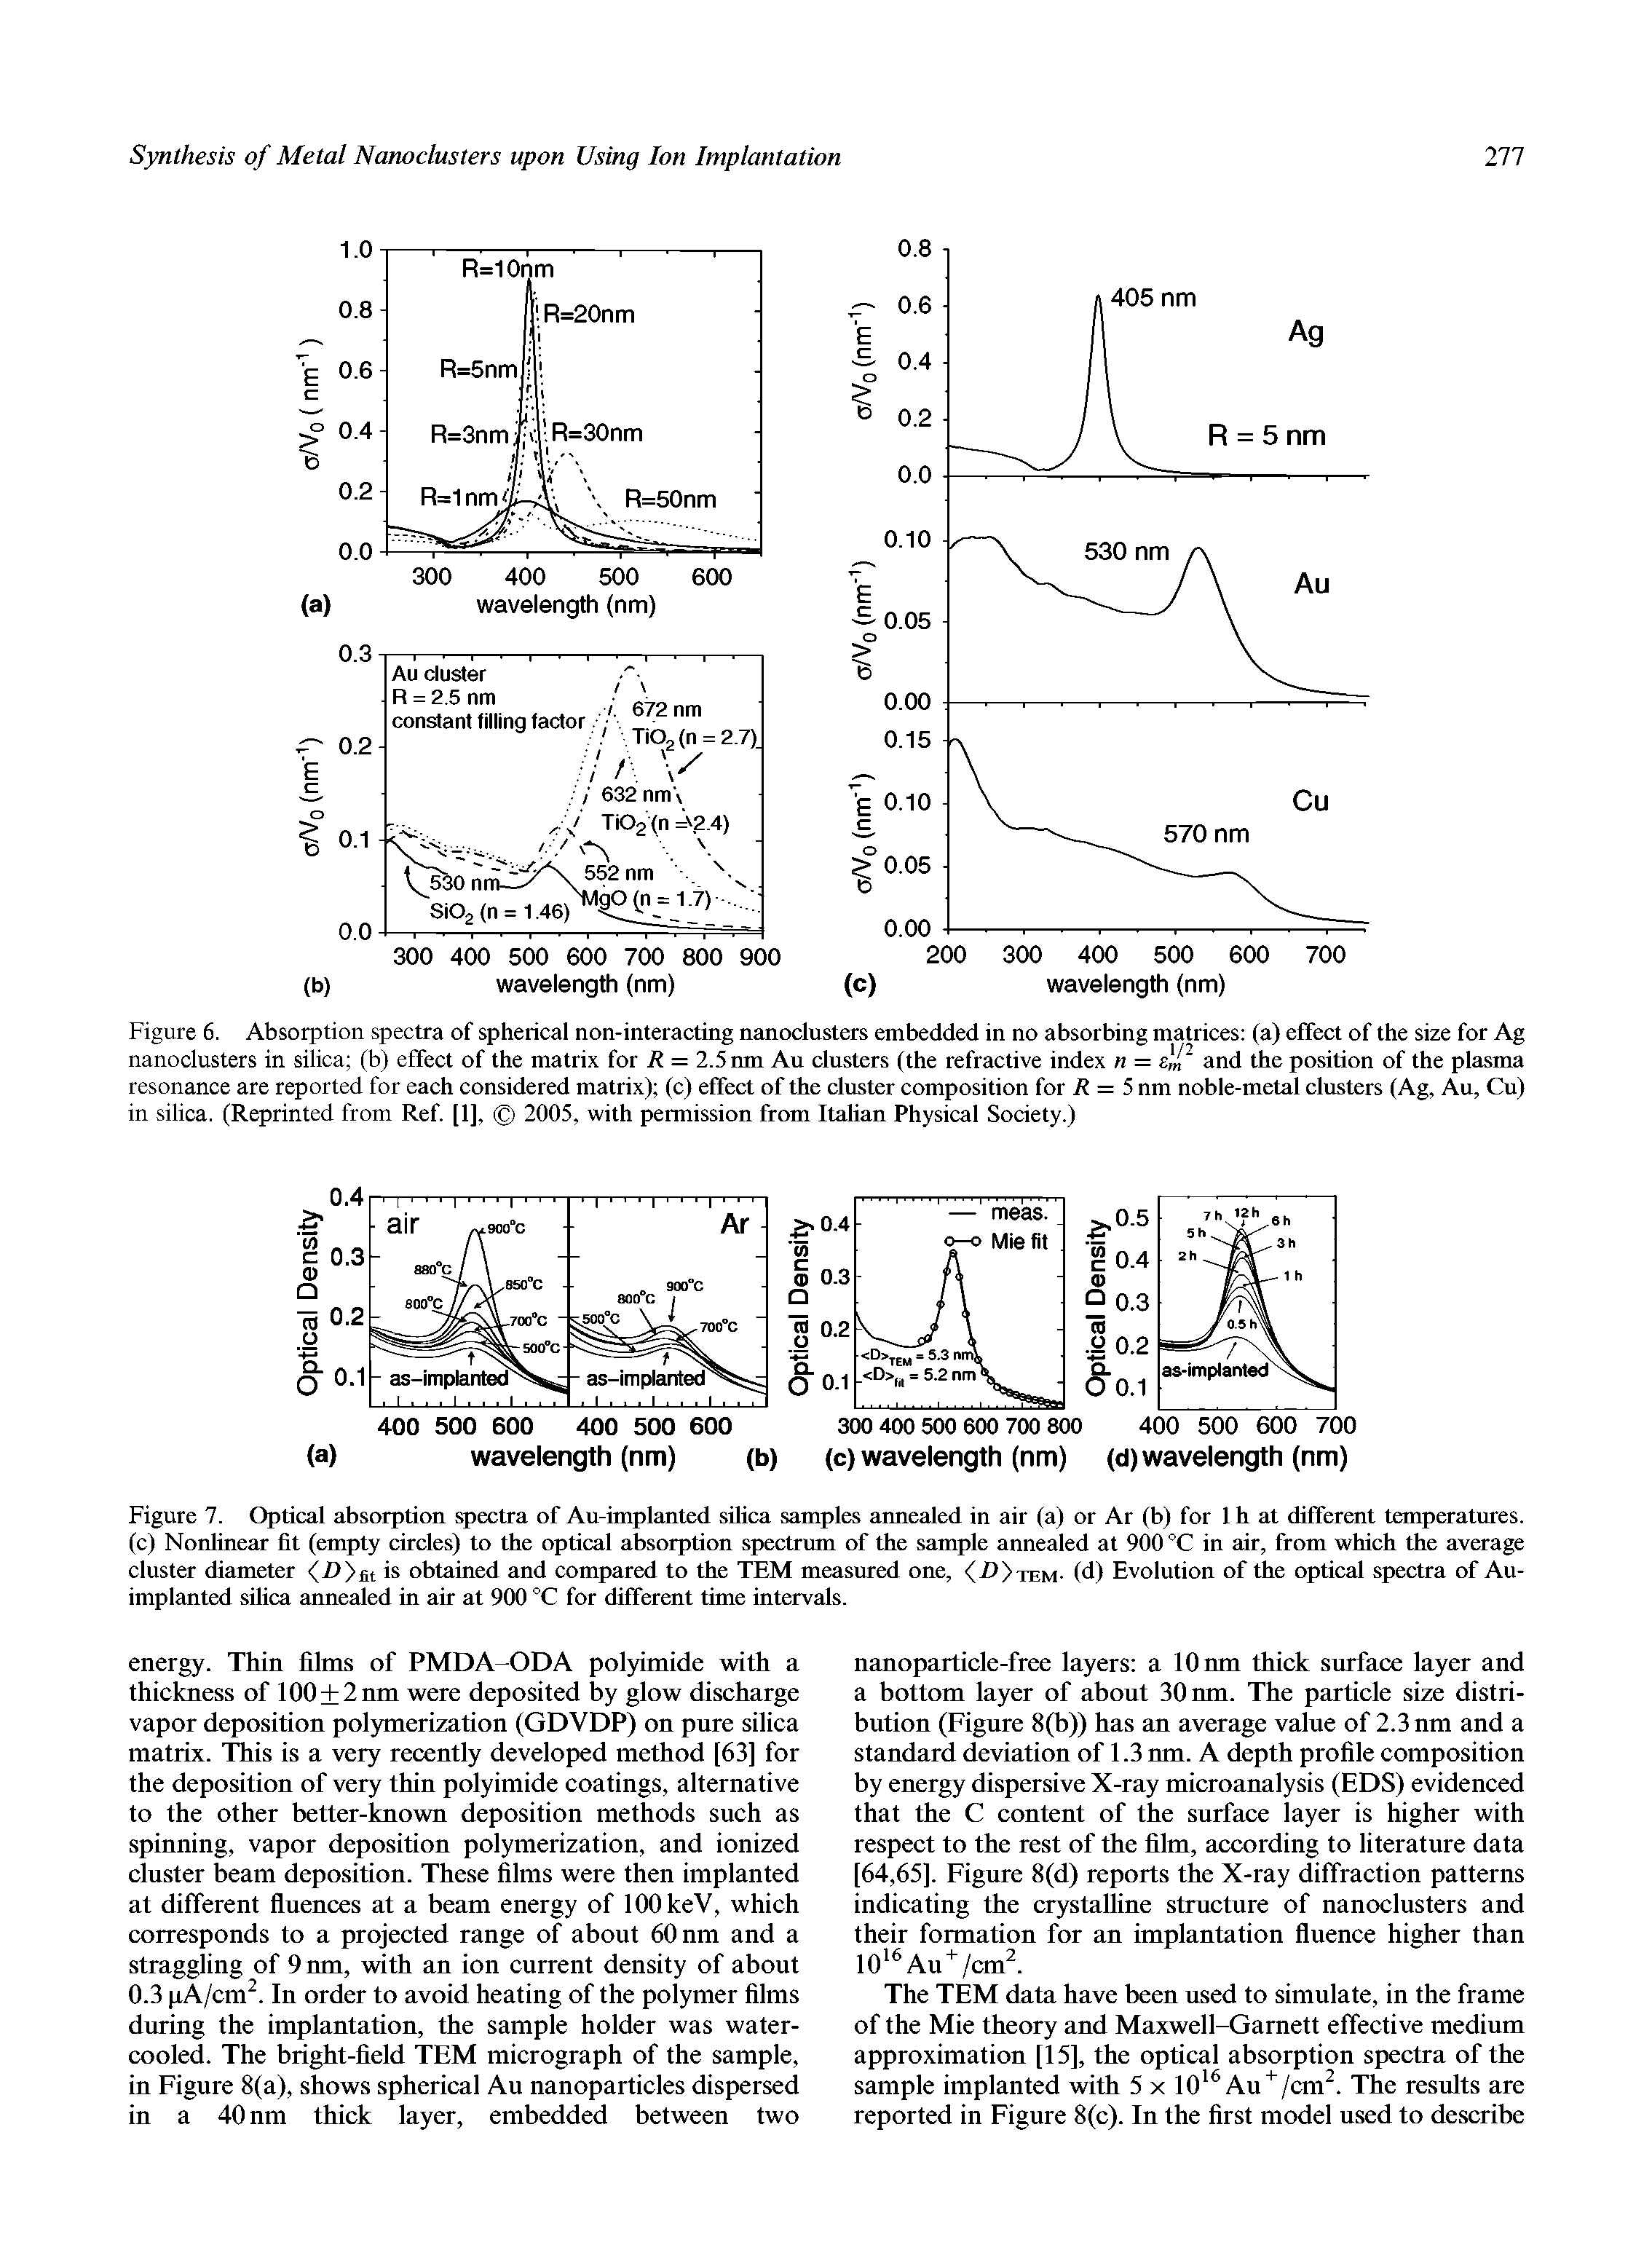 Figure 7. Optical absorption spectra of Au-implanted silica samples atmealed in air (a) or Ar (b) for 1 h at different temperatures, (c) Nonlinear fit (empty circles) to the optical absorption spectrum of the sample annealed at 900 °C in air, from which the average cluster diameter is obtained and compared to the TEM measured one, (d) Evolution of the optical spectra of Au-...